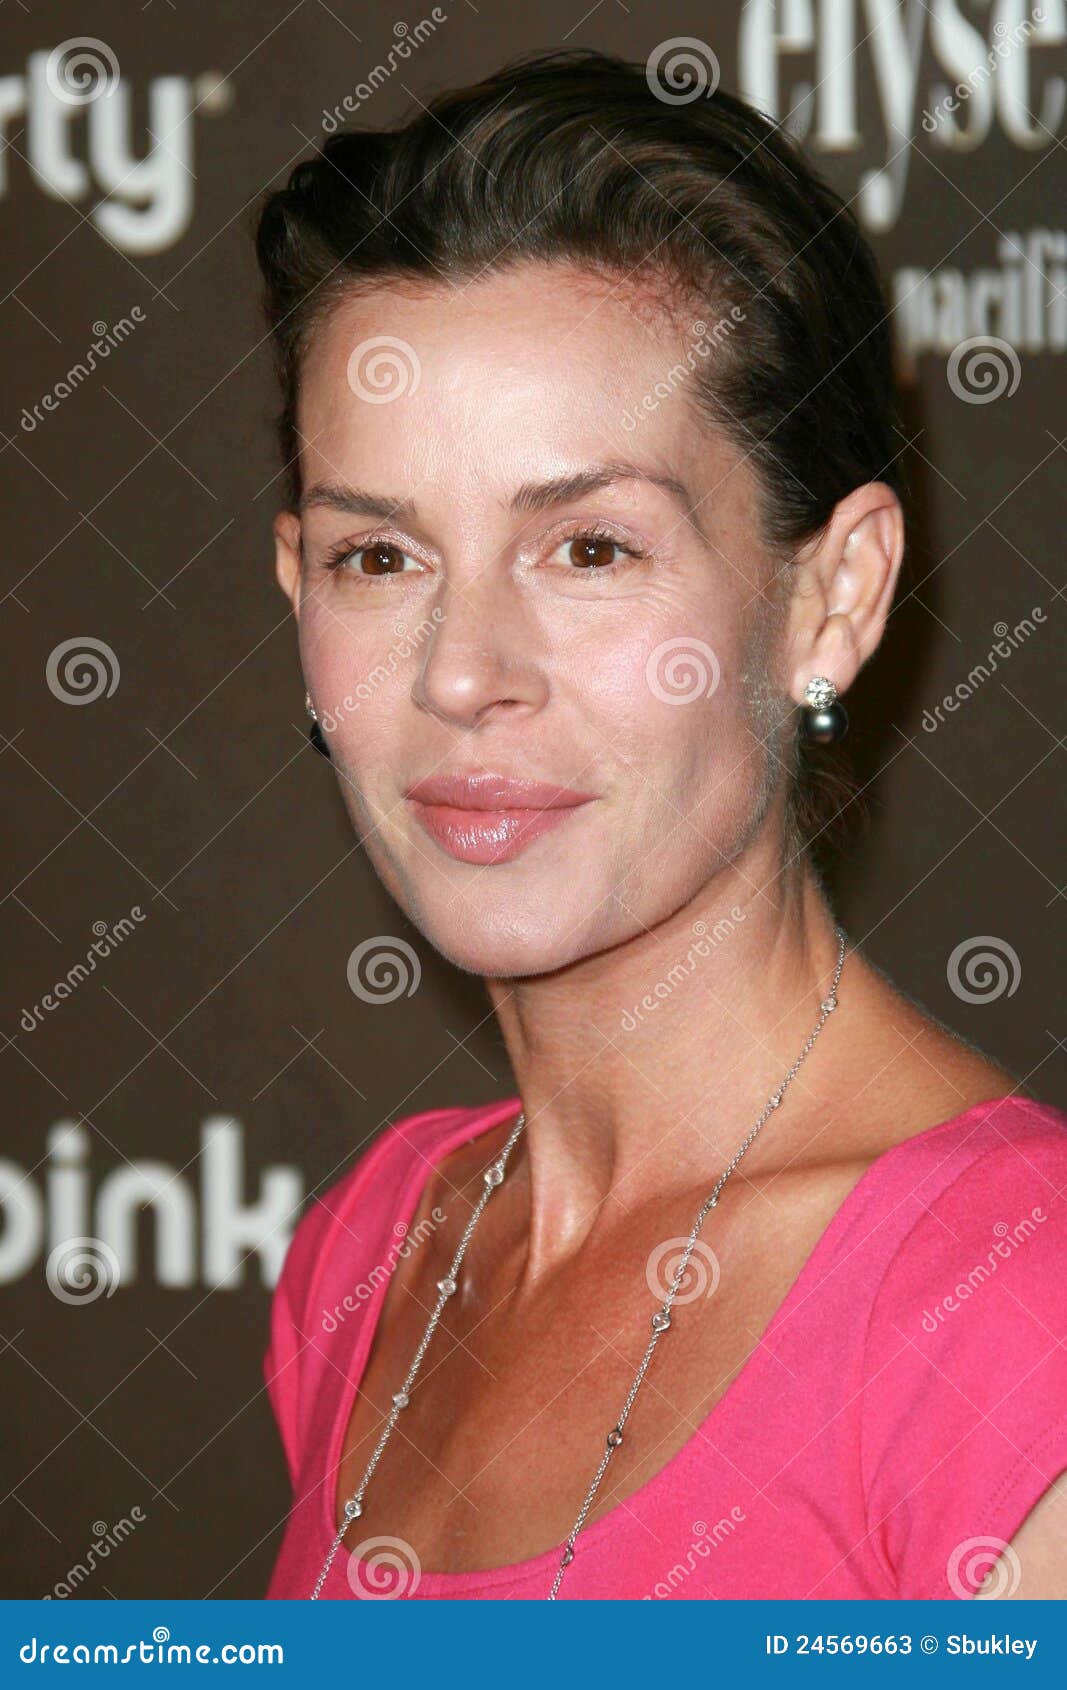 Images embeth davidtz Where Is